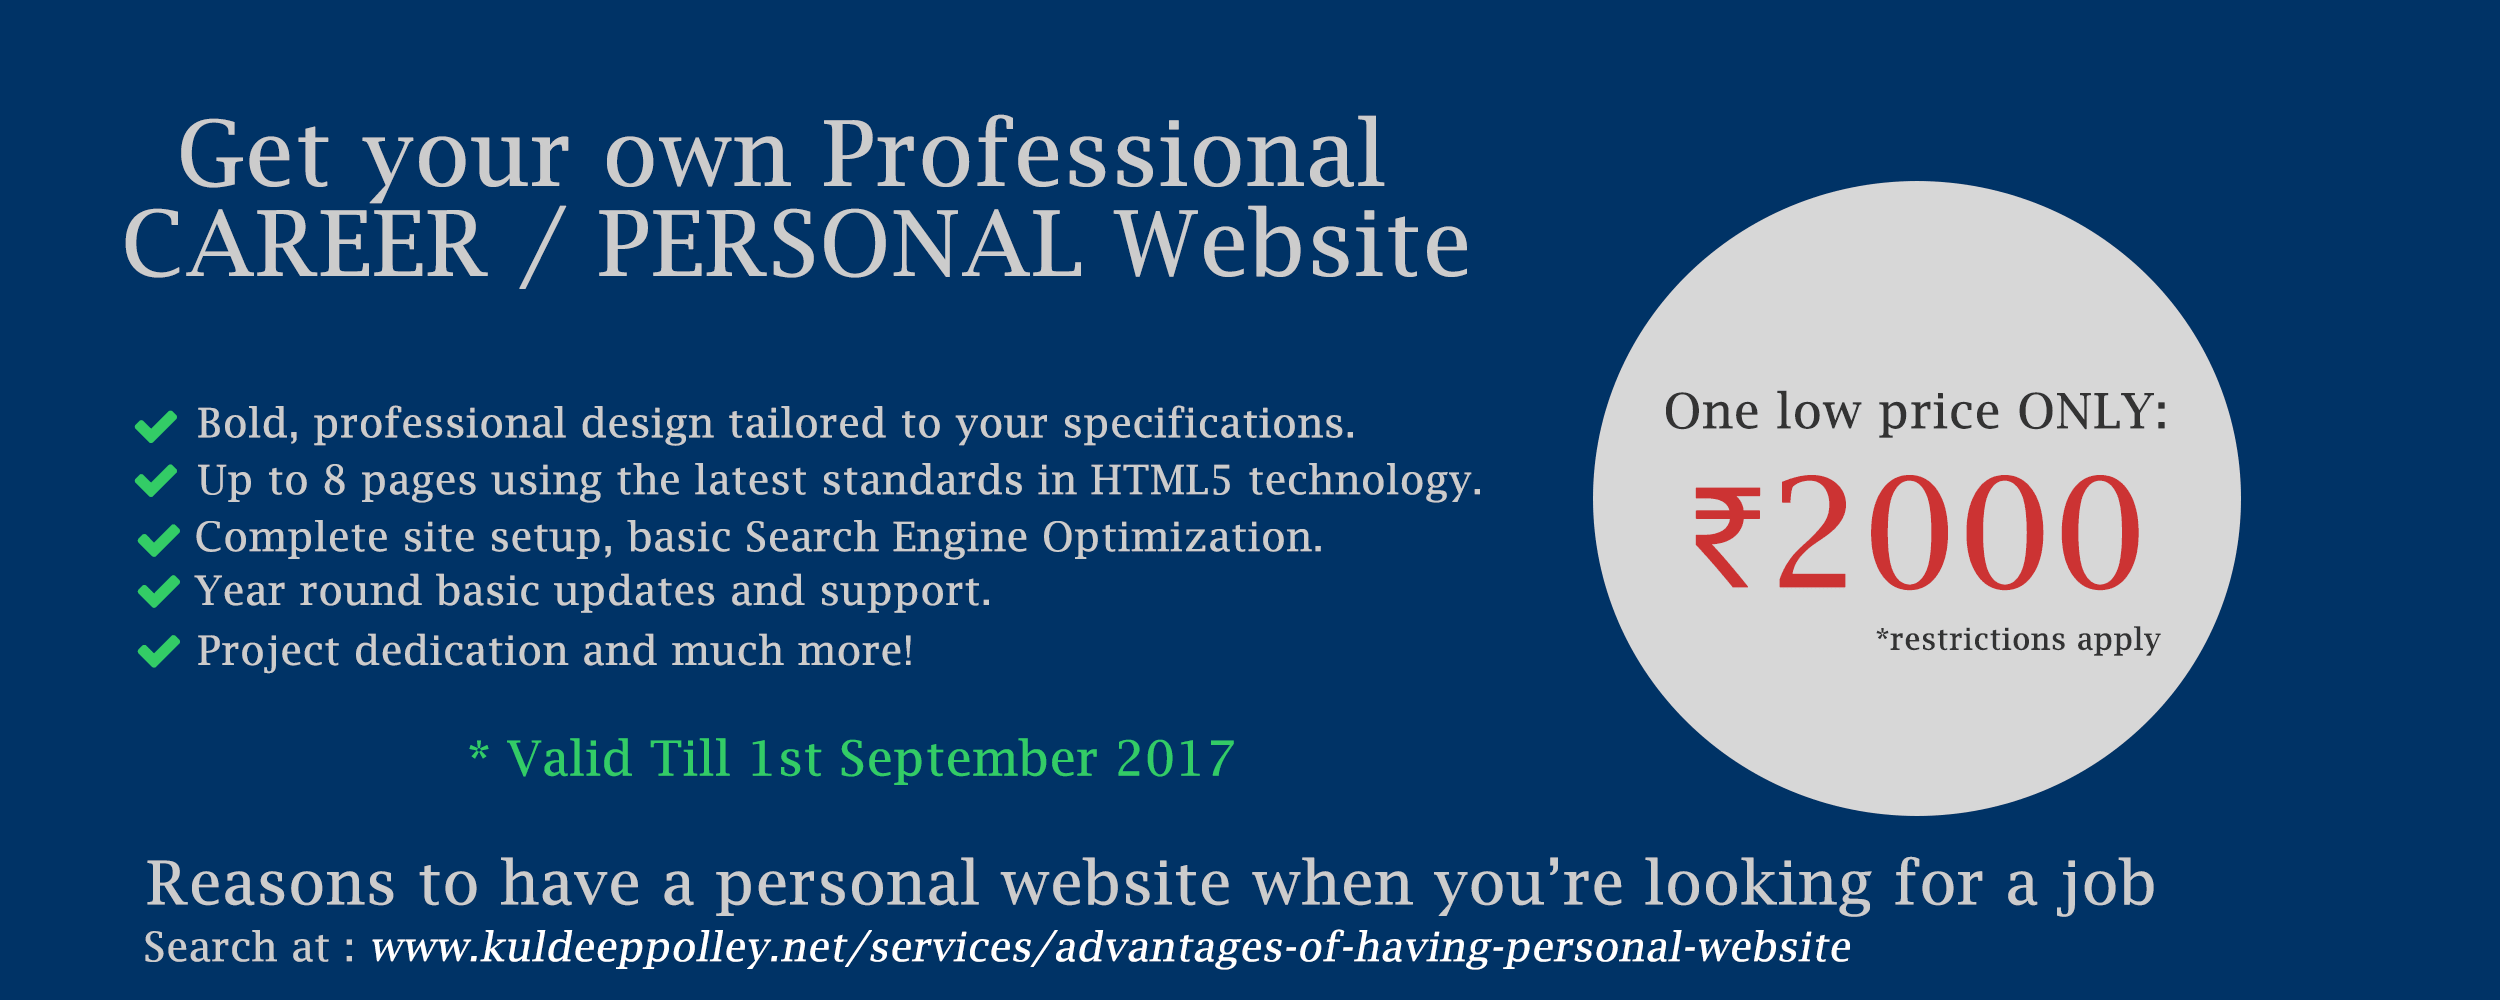 personal website price offer